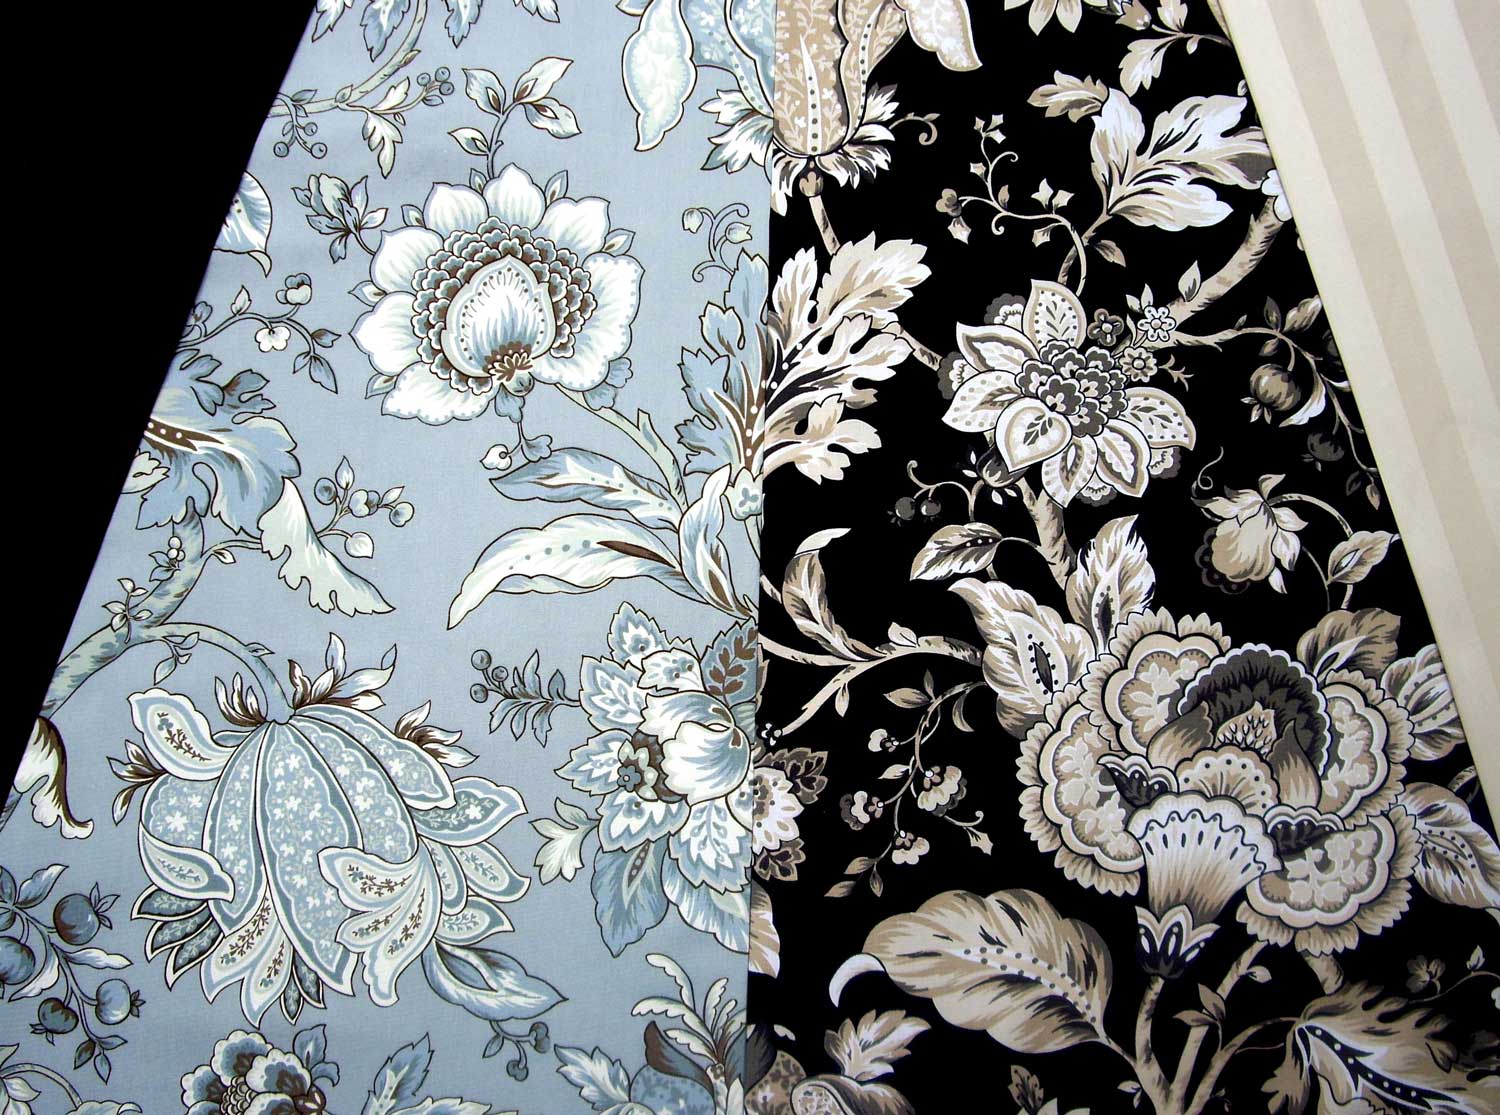 2- French print fabric